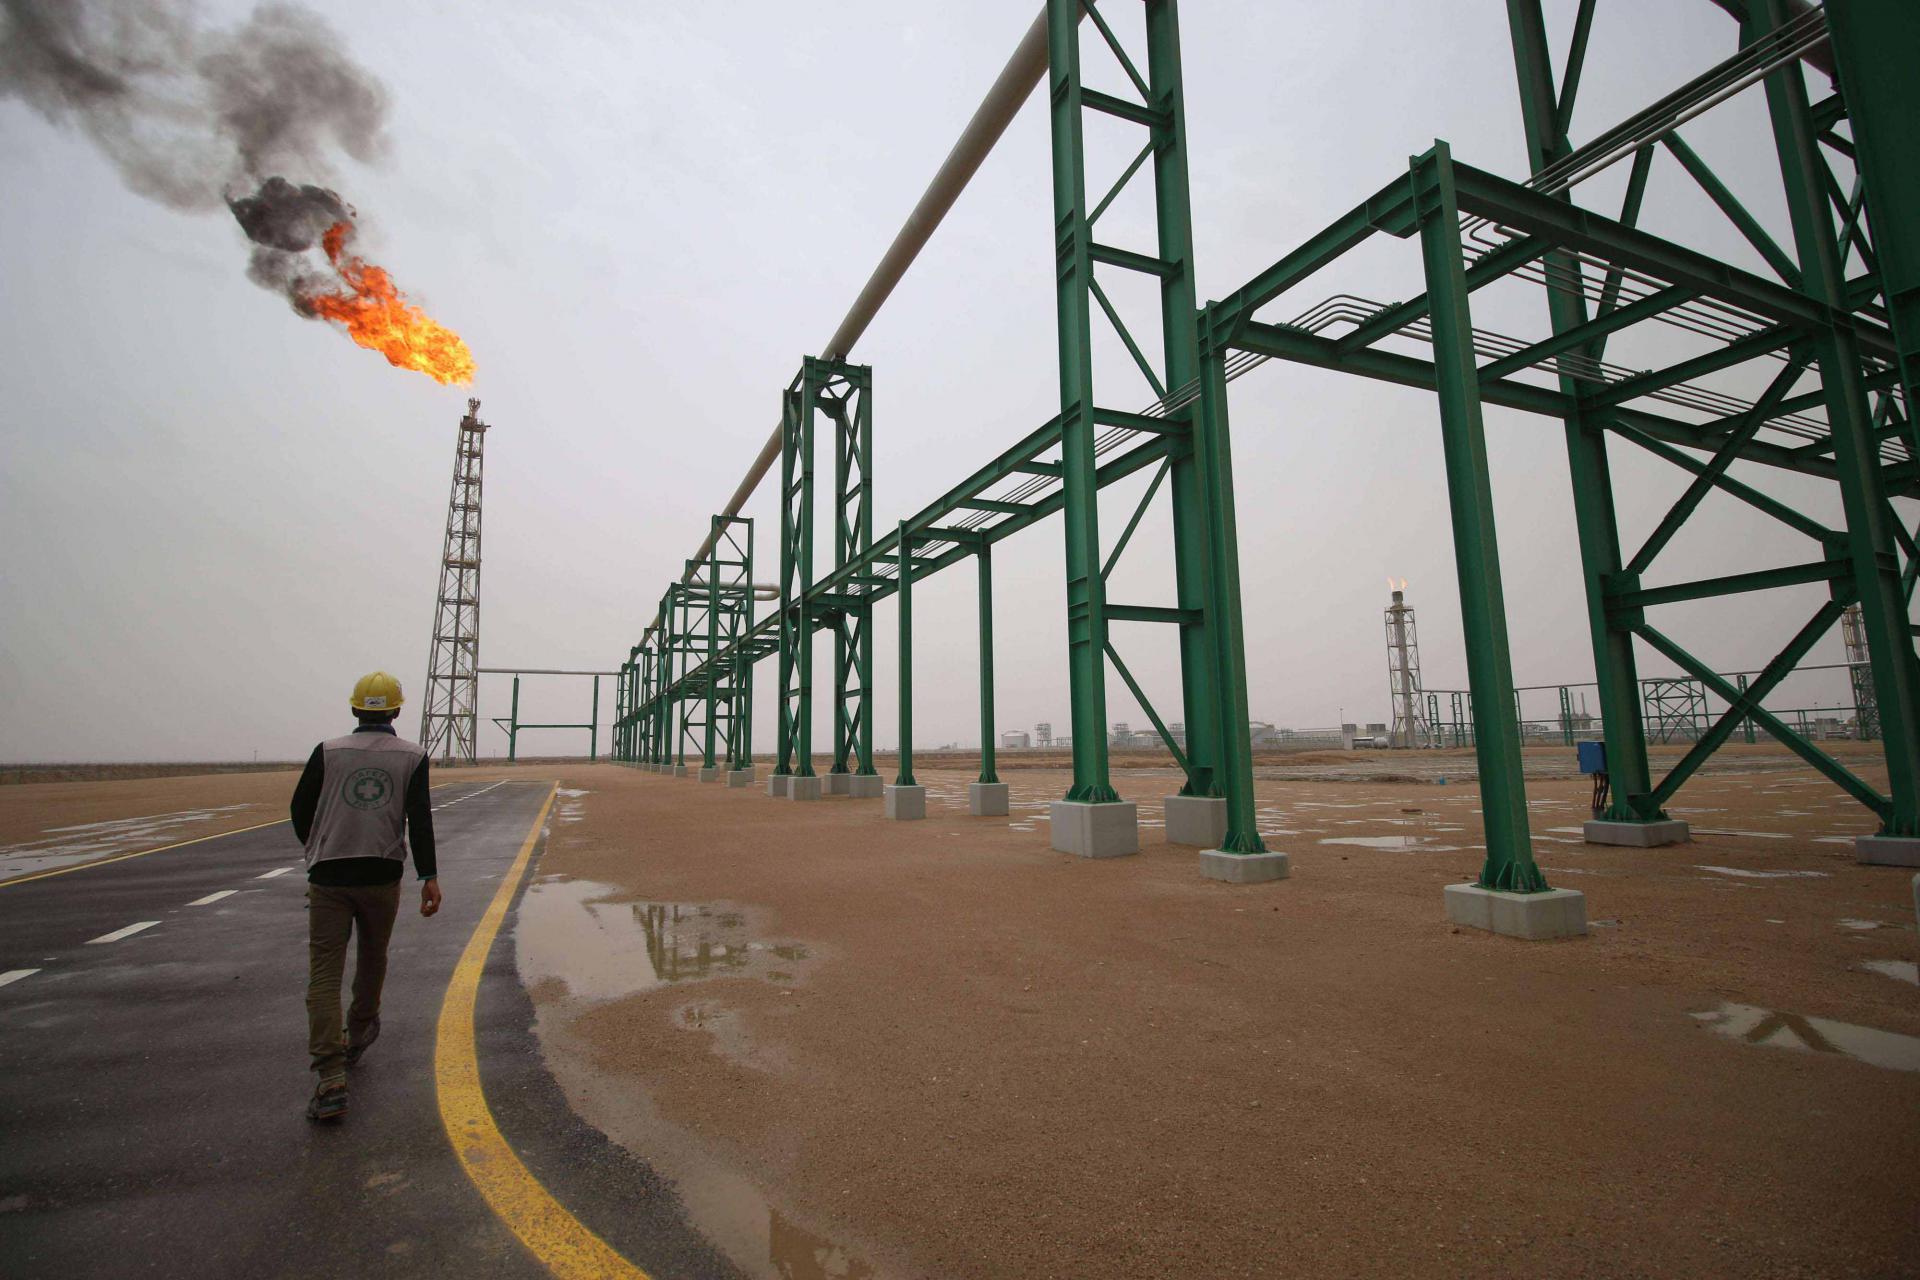  An employee walks at the Zubair oil and gas field in Basra, last May